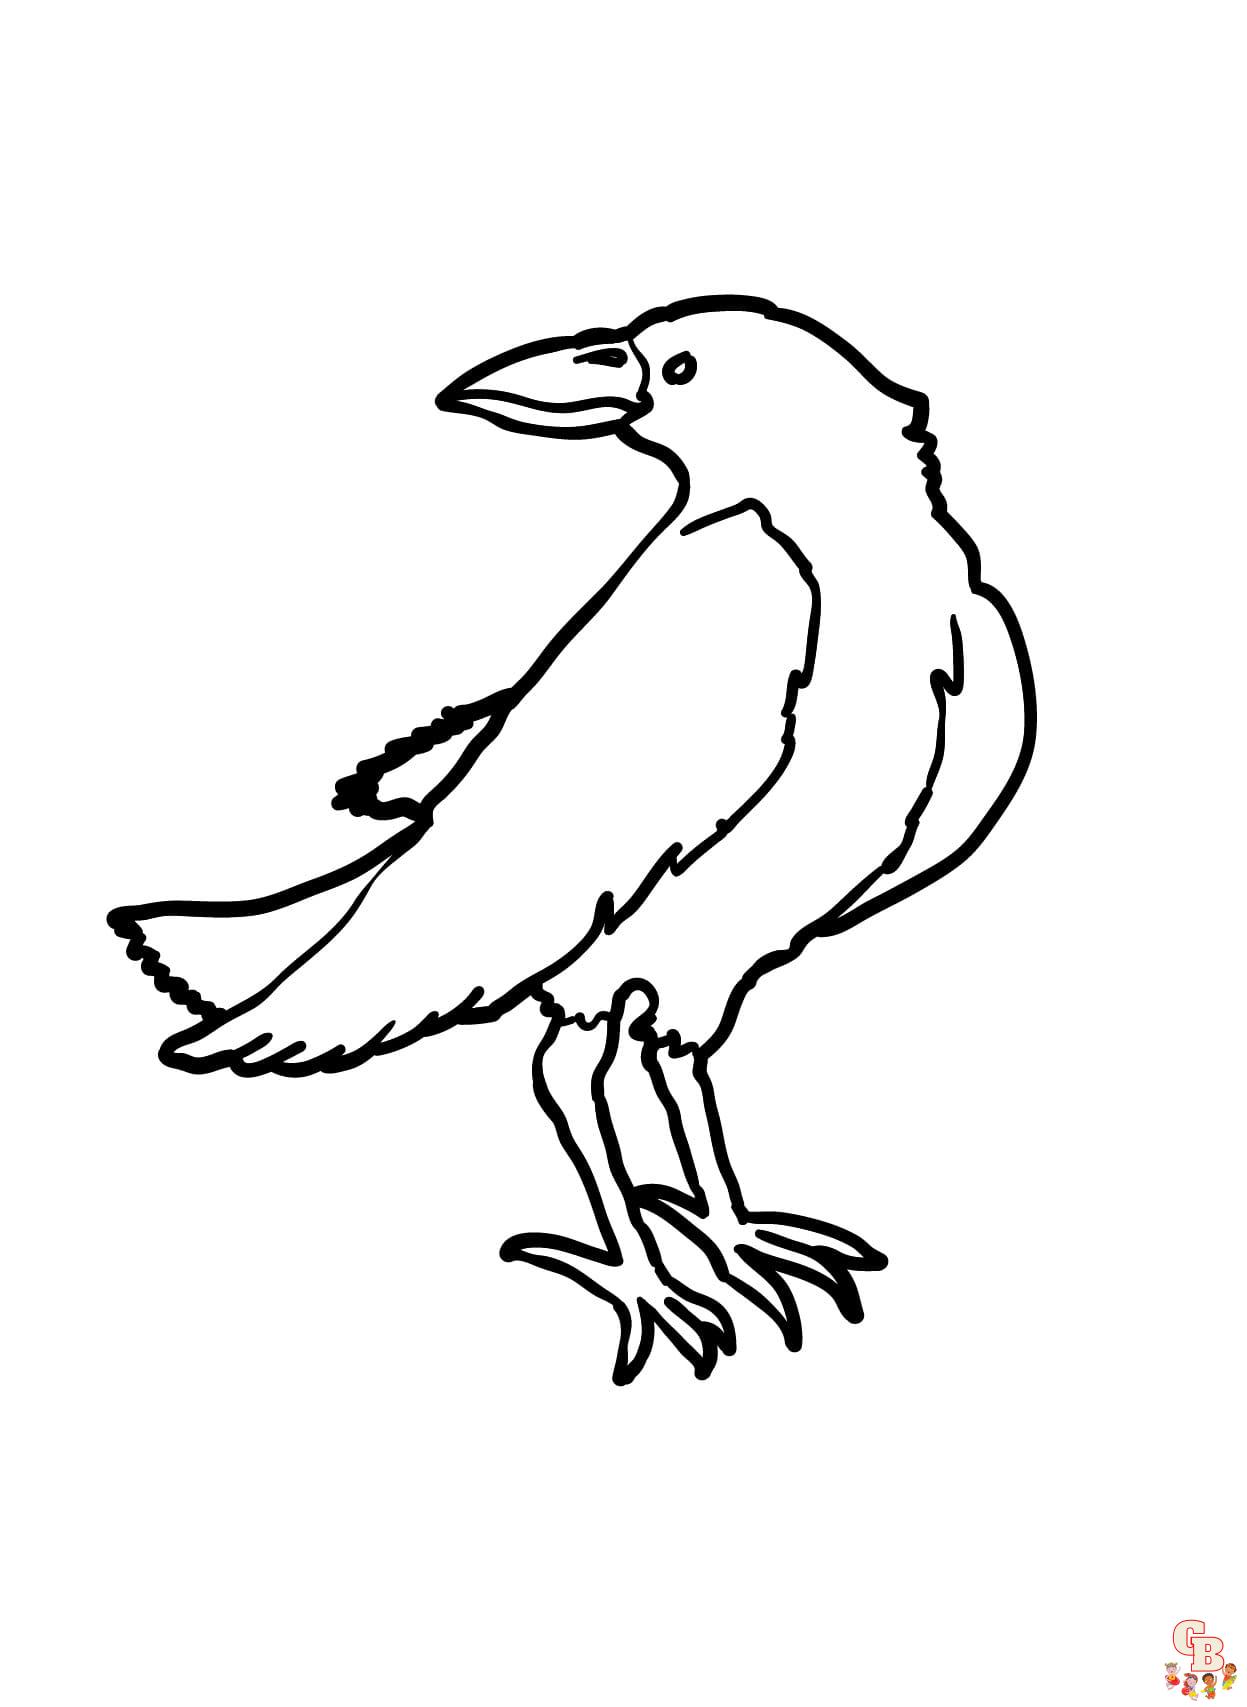 Printable raven coloring pages free for kids and adults